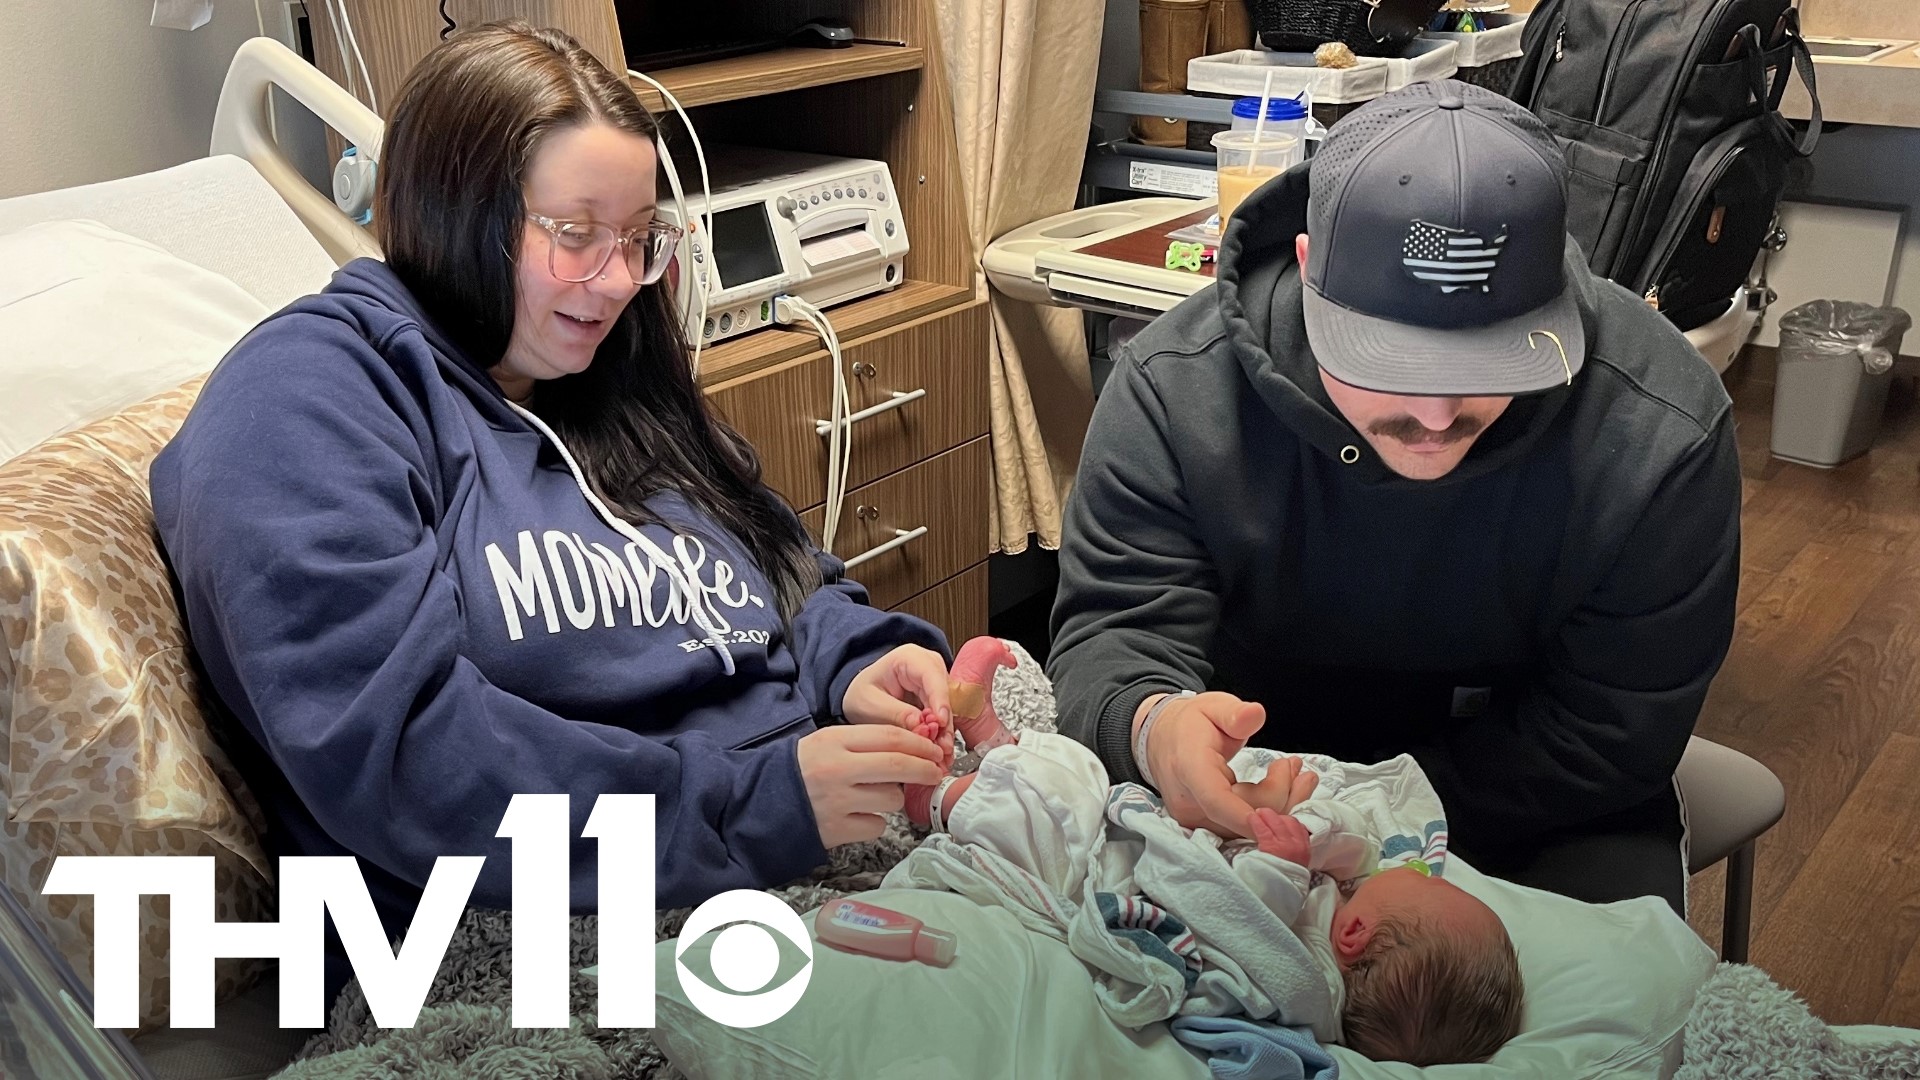 Abbi Zuber was born on February 2, 1999, at a hospital in Saline County. 24 years later, Zuber gave birth to her son in the same hospital and room.